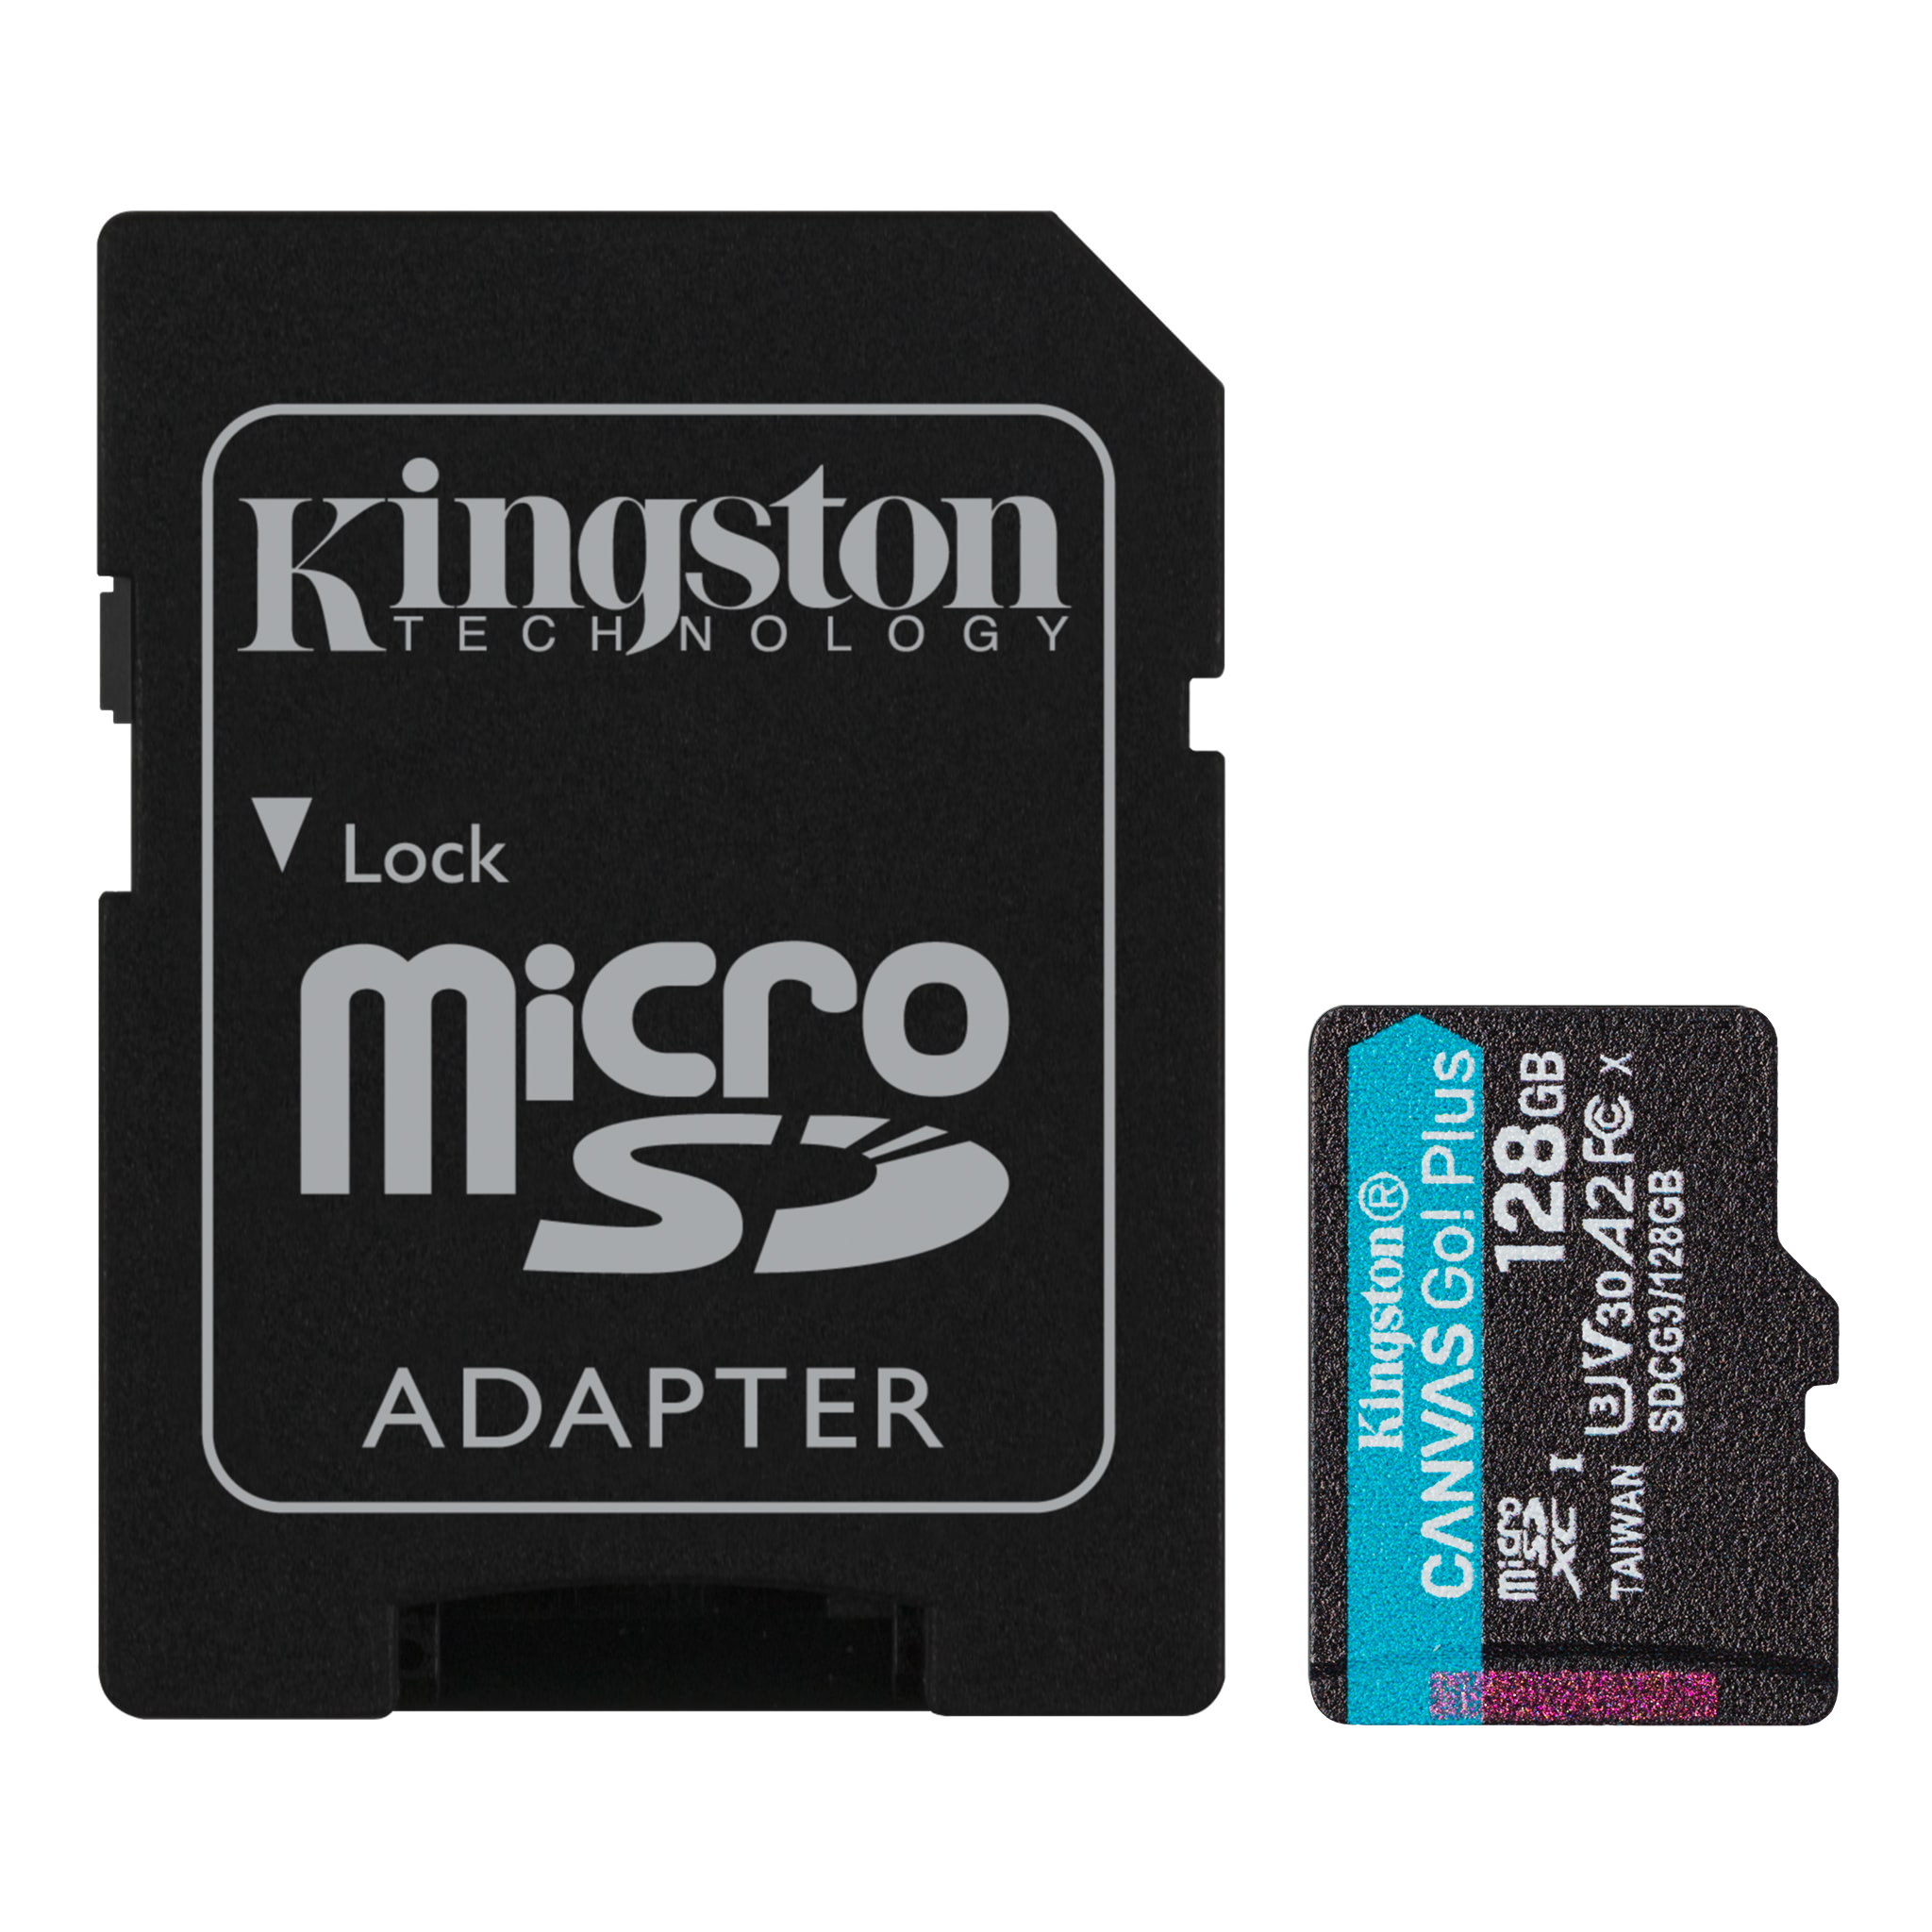 100MBs Works with Kingston Kingston 64GB Xolo Cube 5.0 MicroSDXC Canvas Select Plus Card Verified by SanFlash.